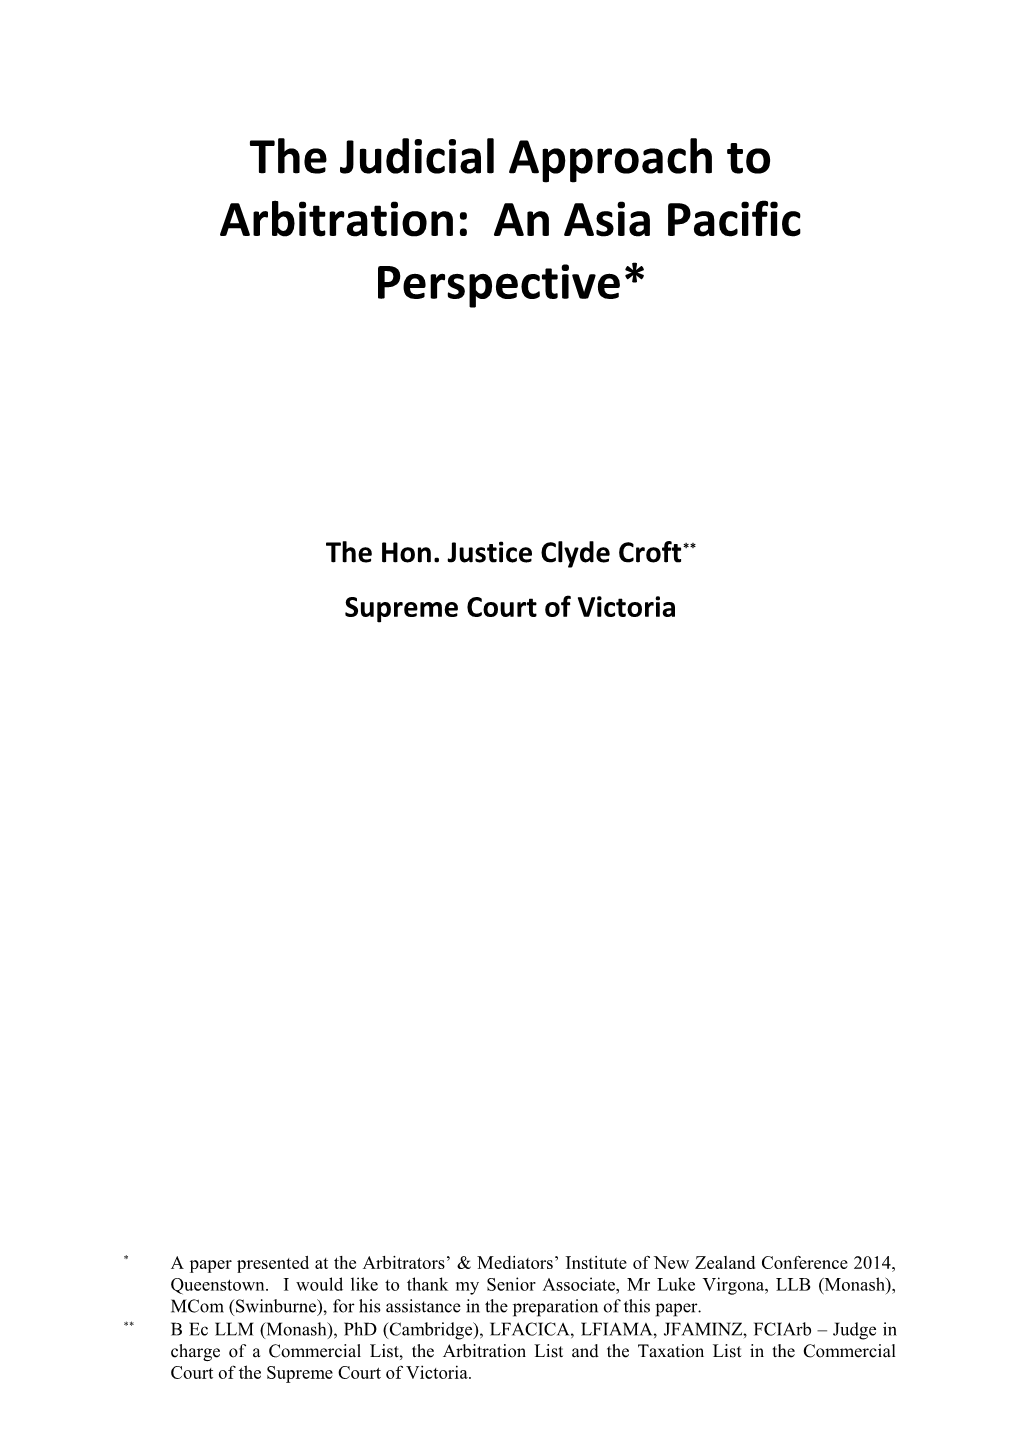 The Judicial Approach to Arbitration: an Asia Pacific Perspective*